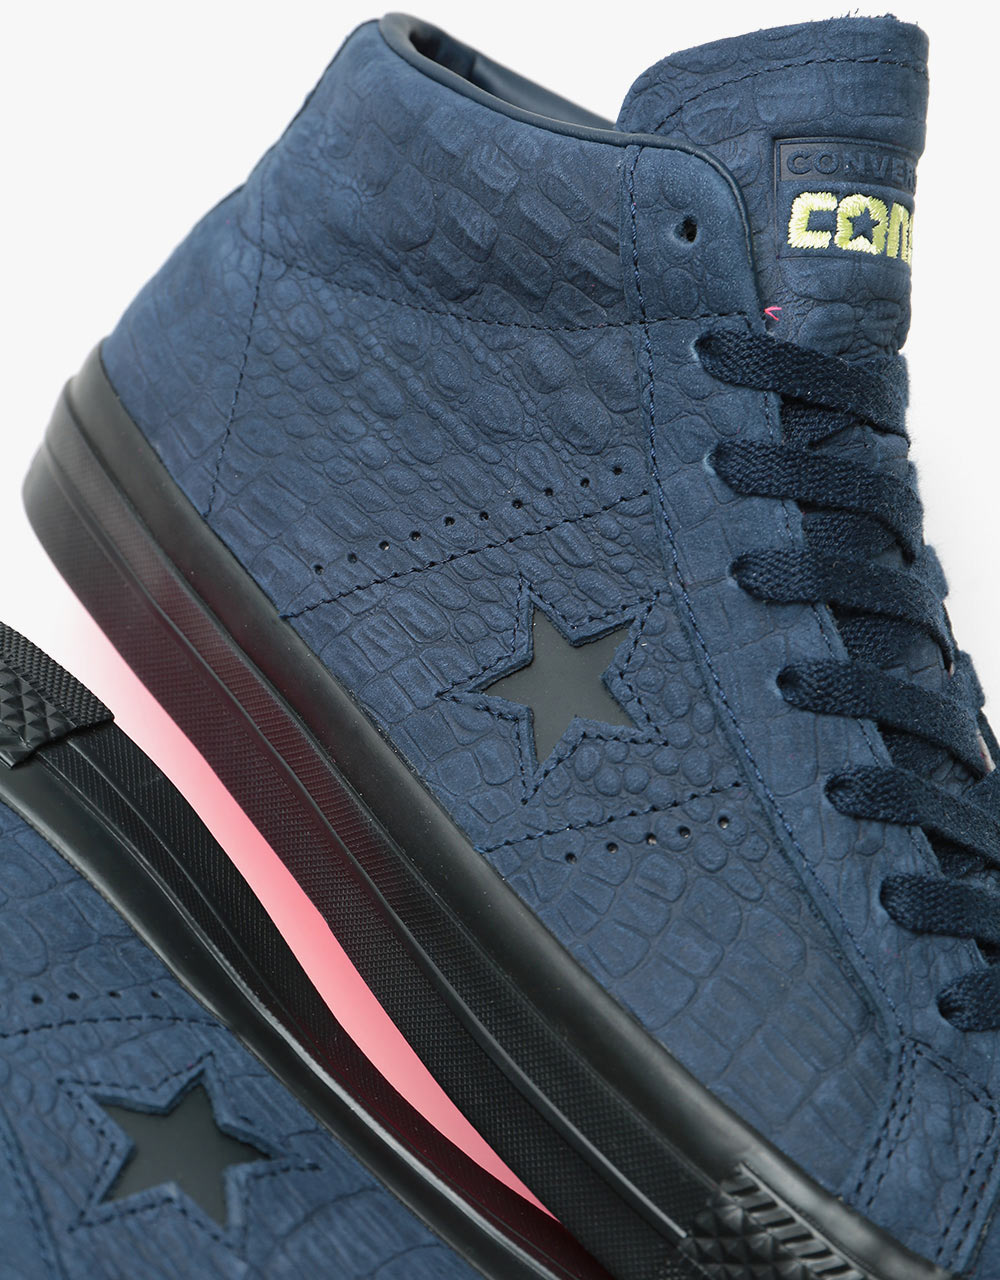 Converse One Star Pro Mid Skate Shoes - Obsidian/Hyper Pink/Black